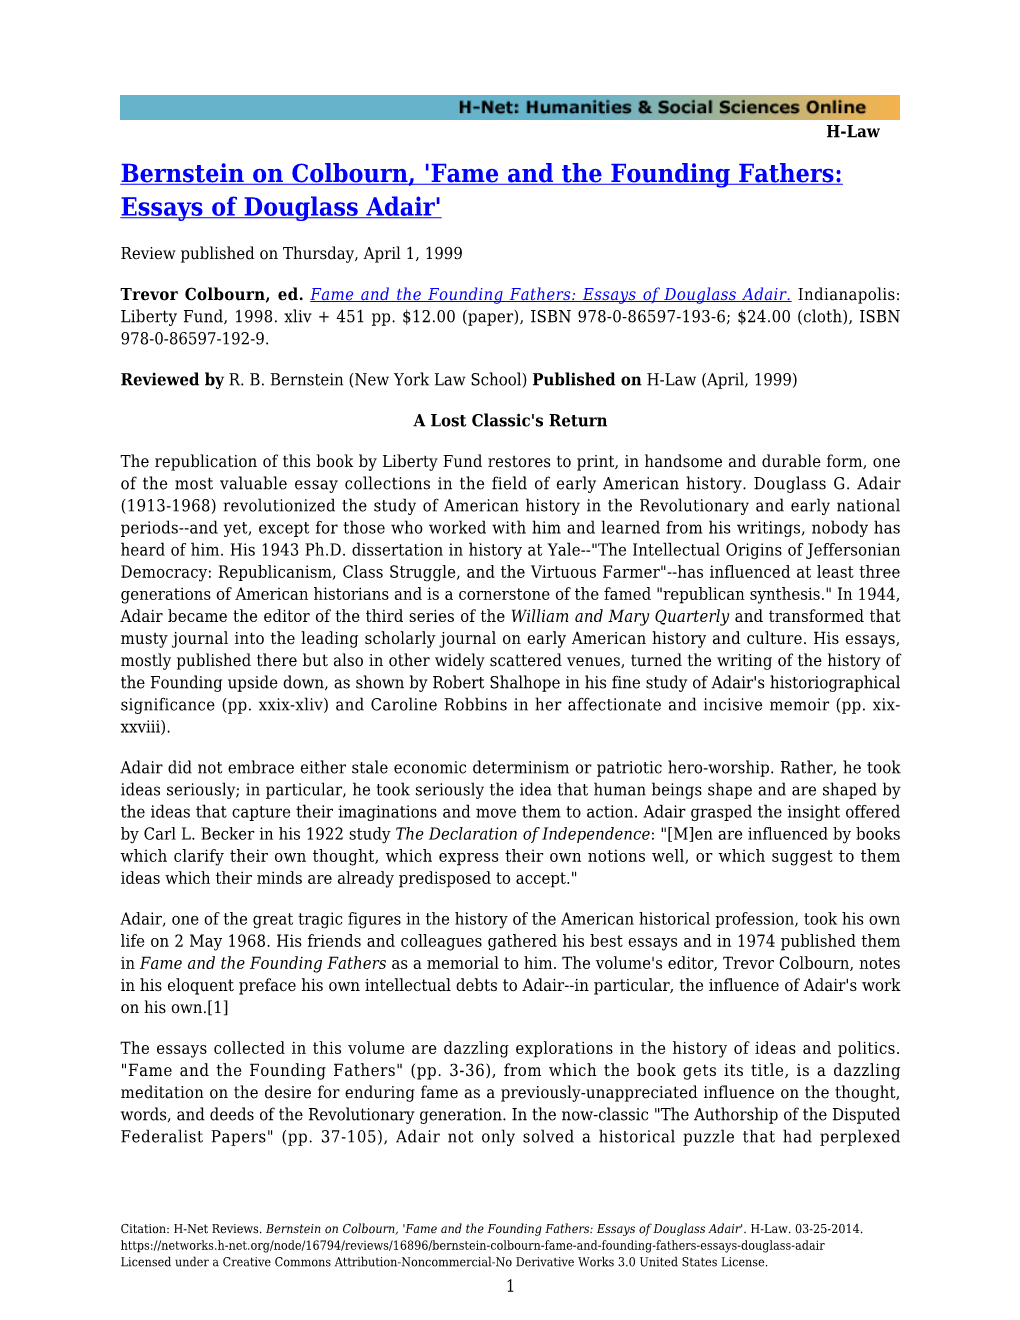 Fame and the Founding Fathers: Essays of Douglass Adair'